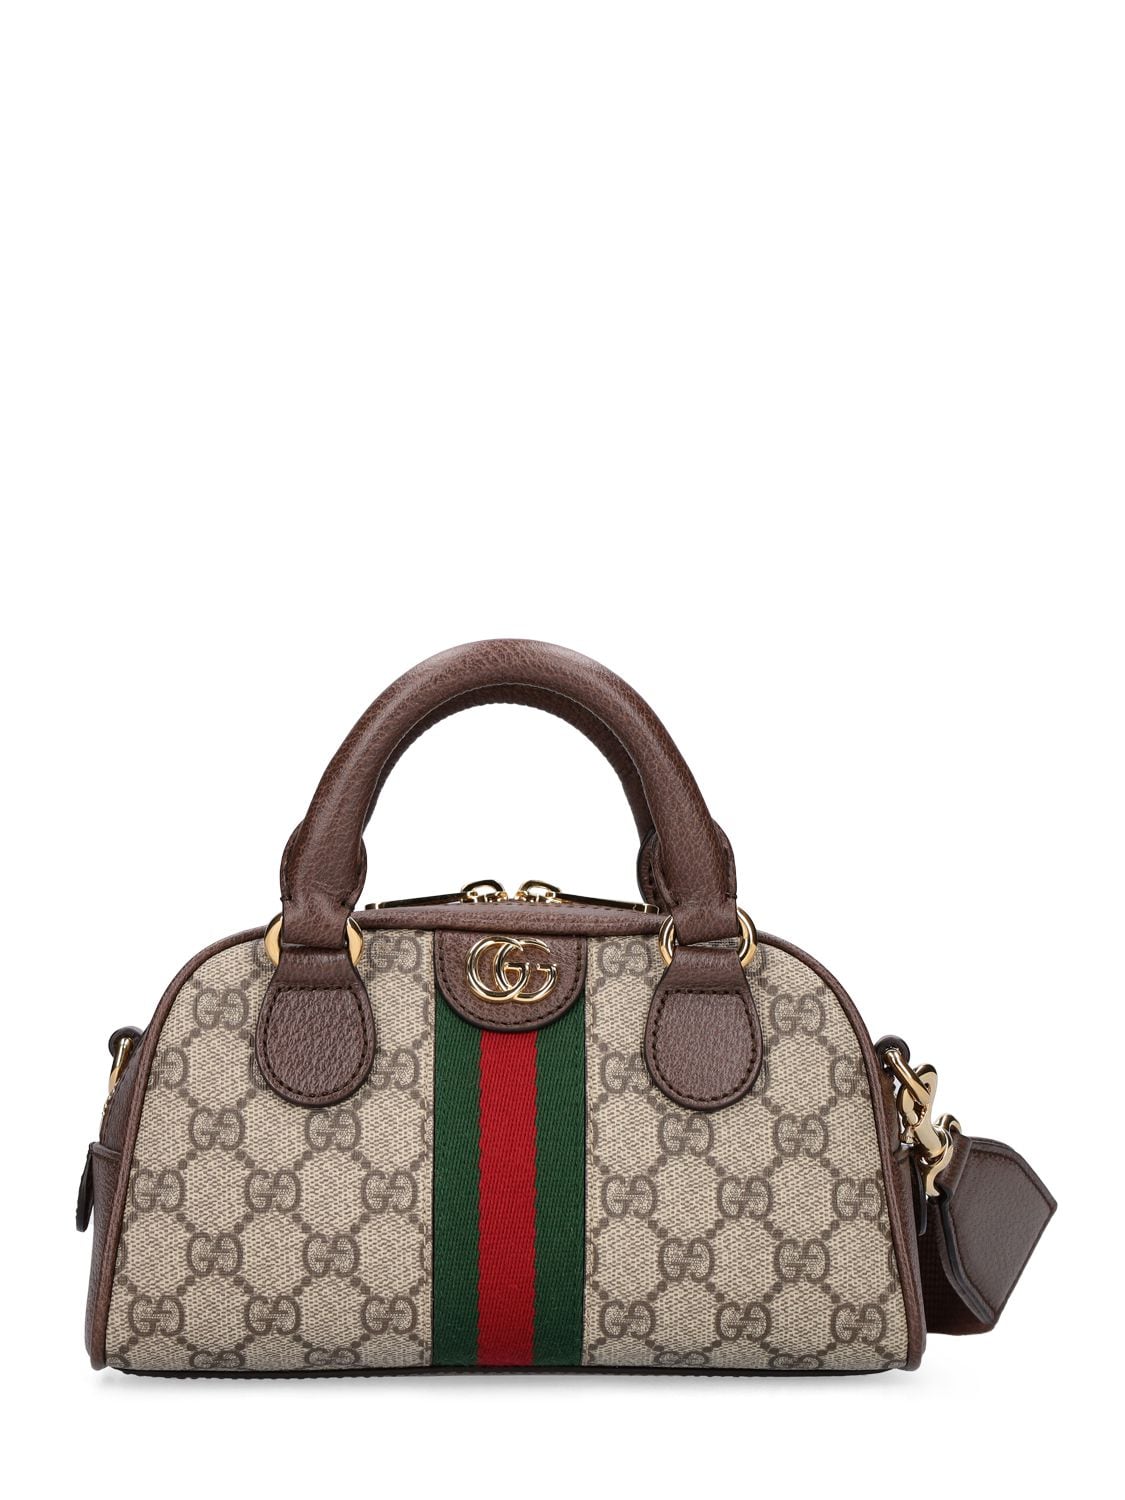 500 by gucci bag brown